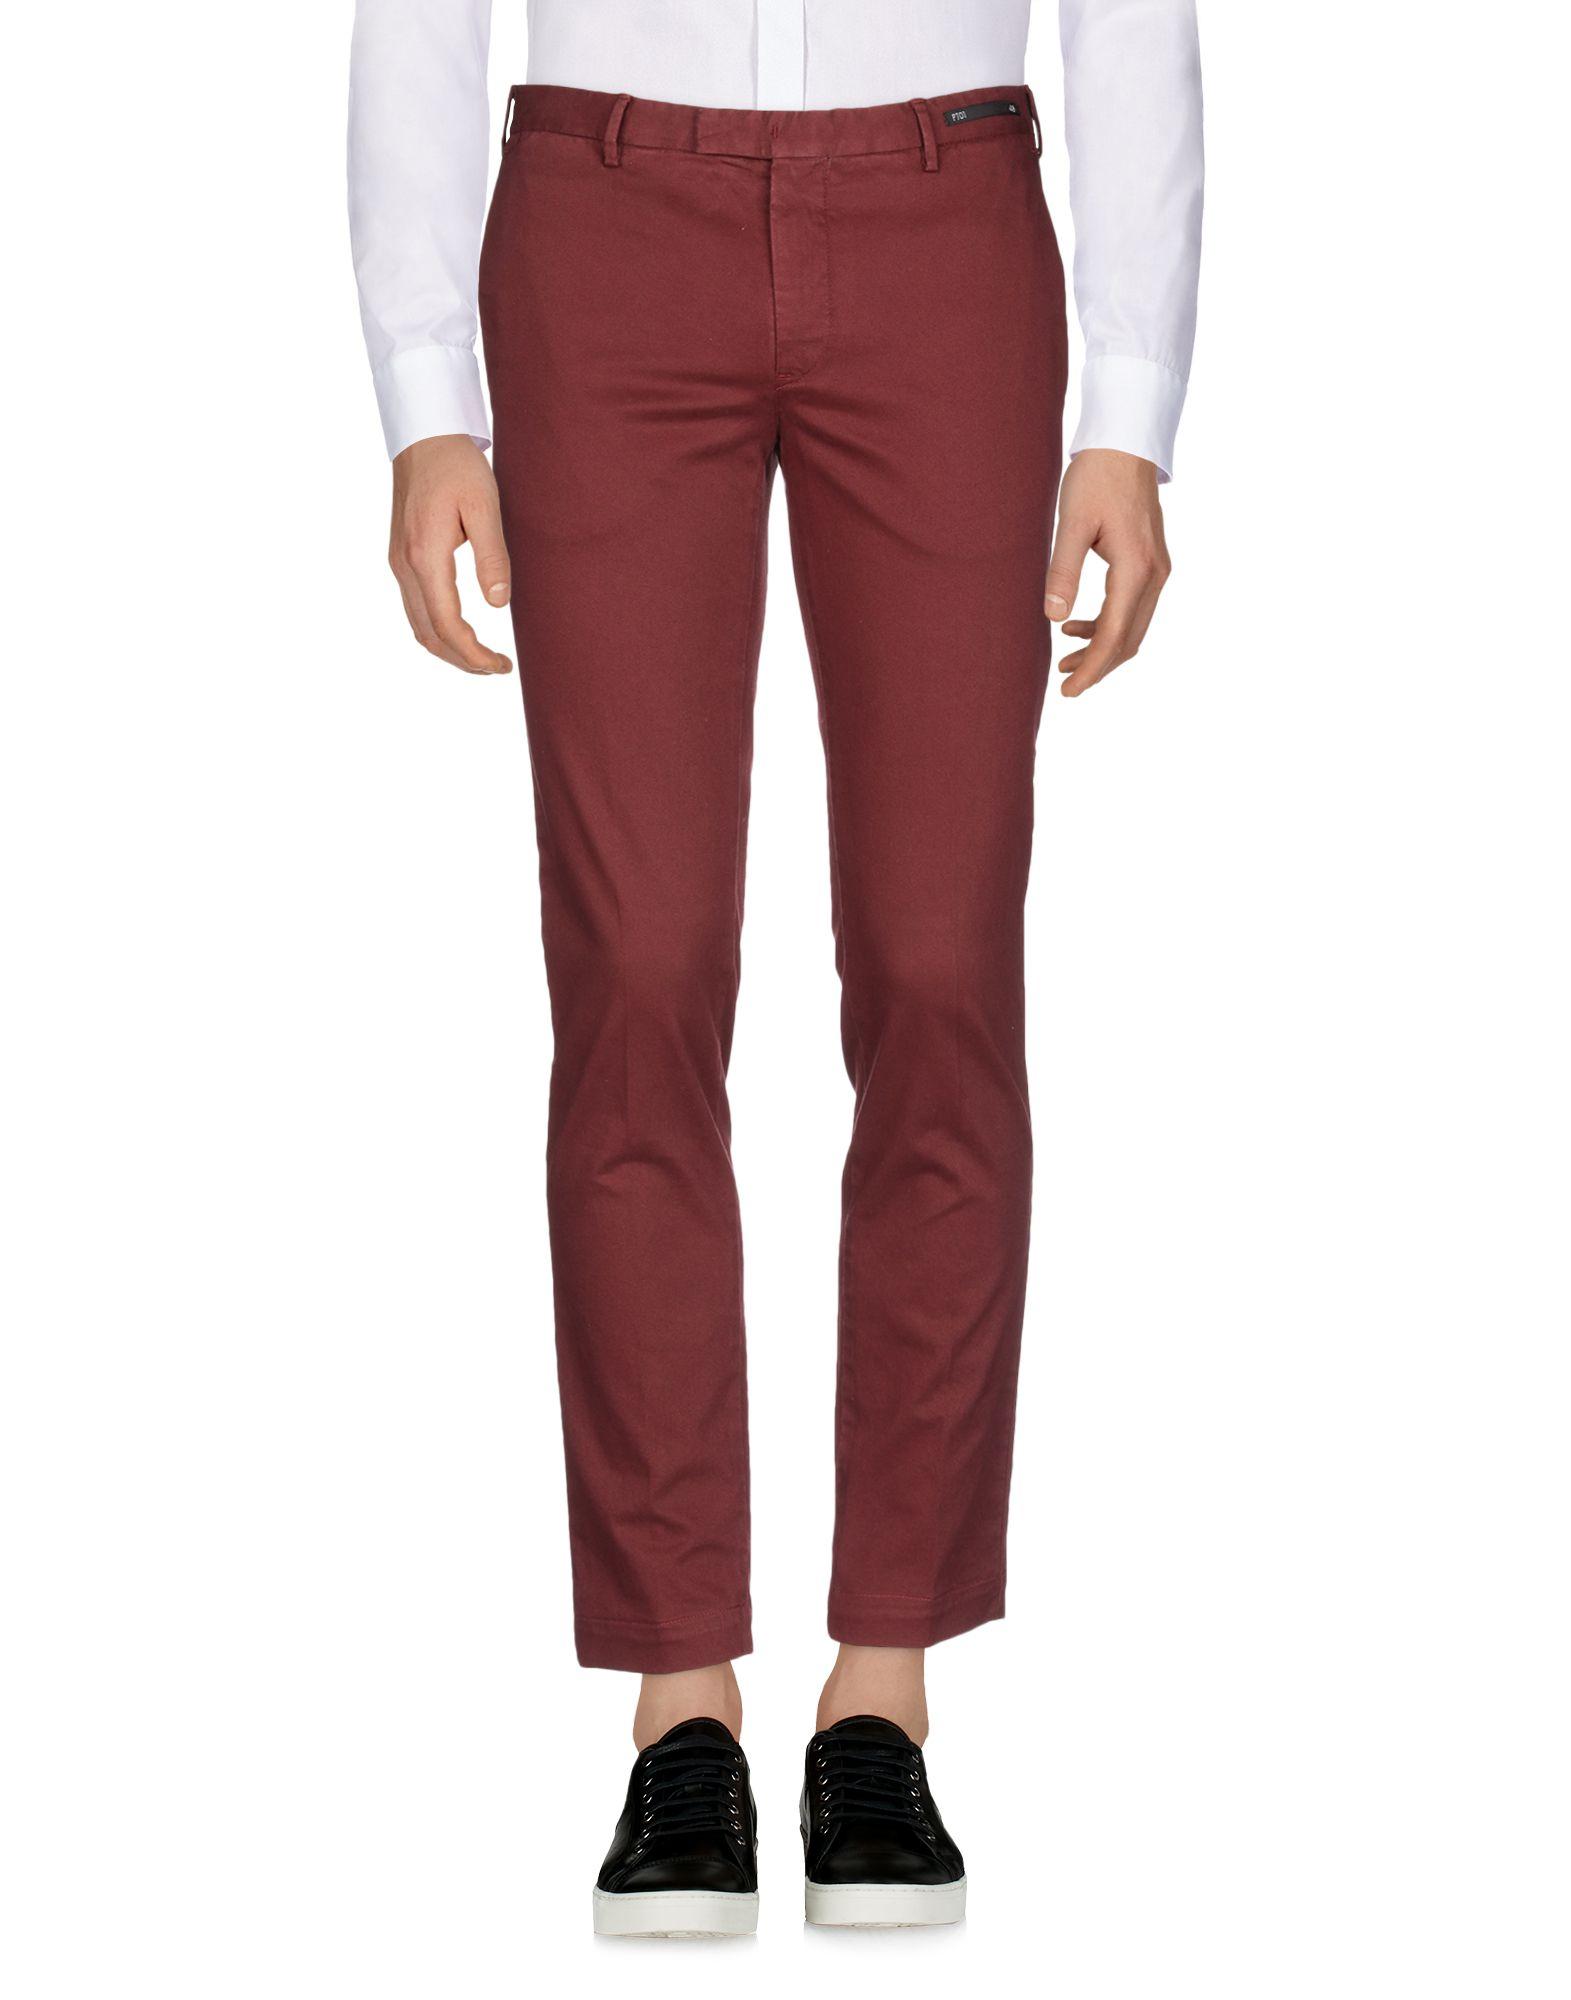 PT01 Cotton Casual Pants in Brick Red (Red) for Men - Lyst